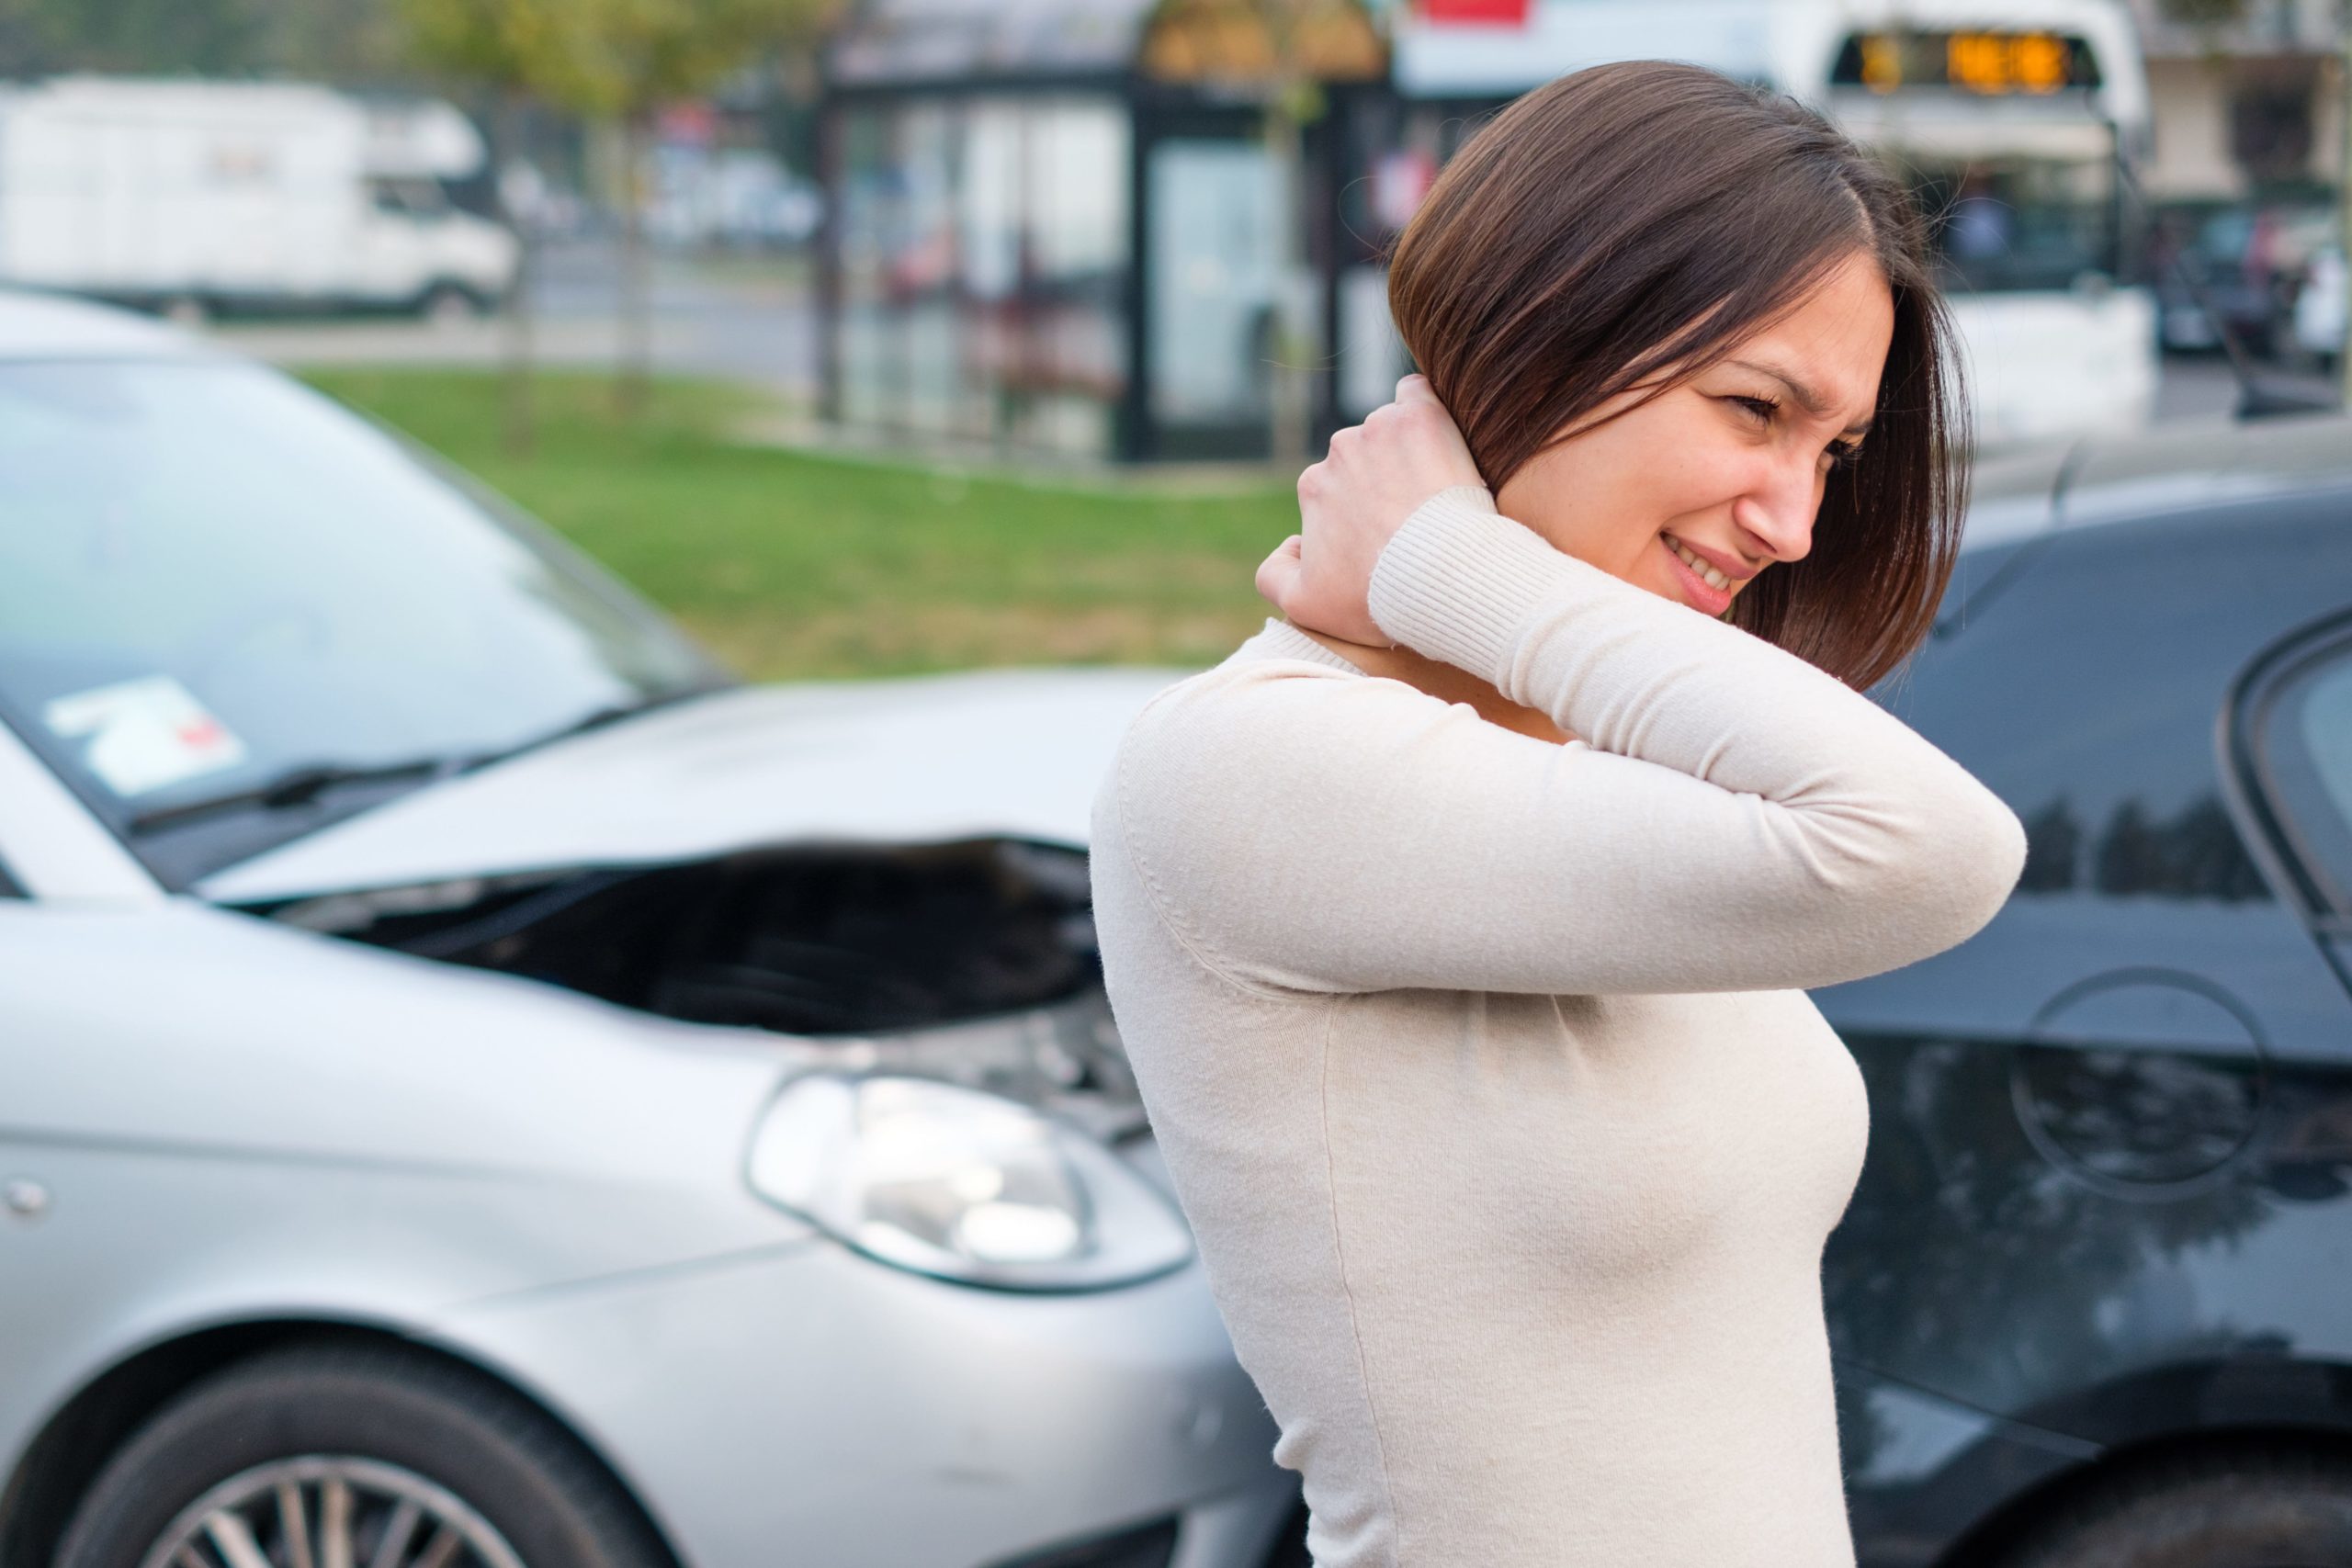 How Do You Treat Whiplash After An Accident?